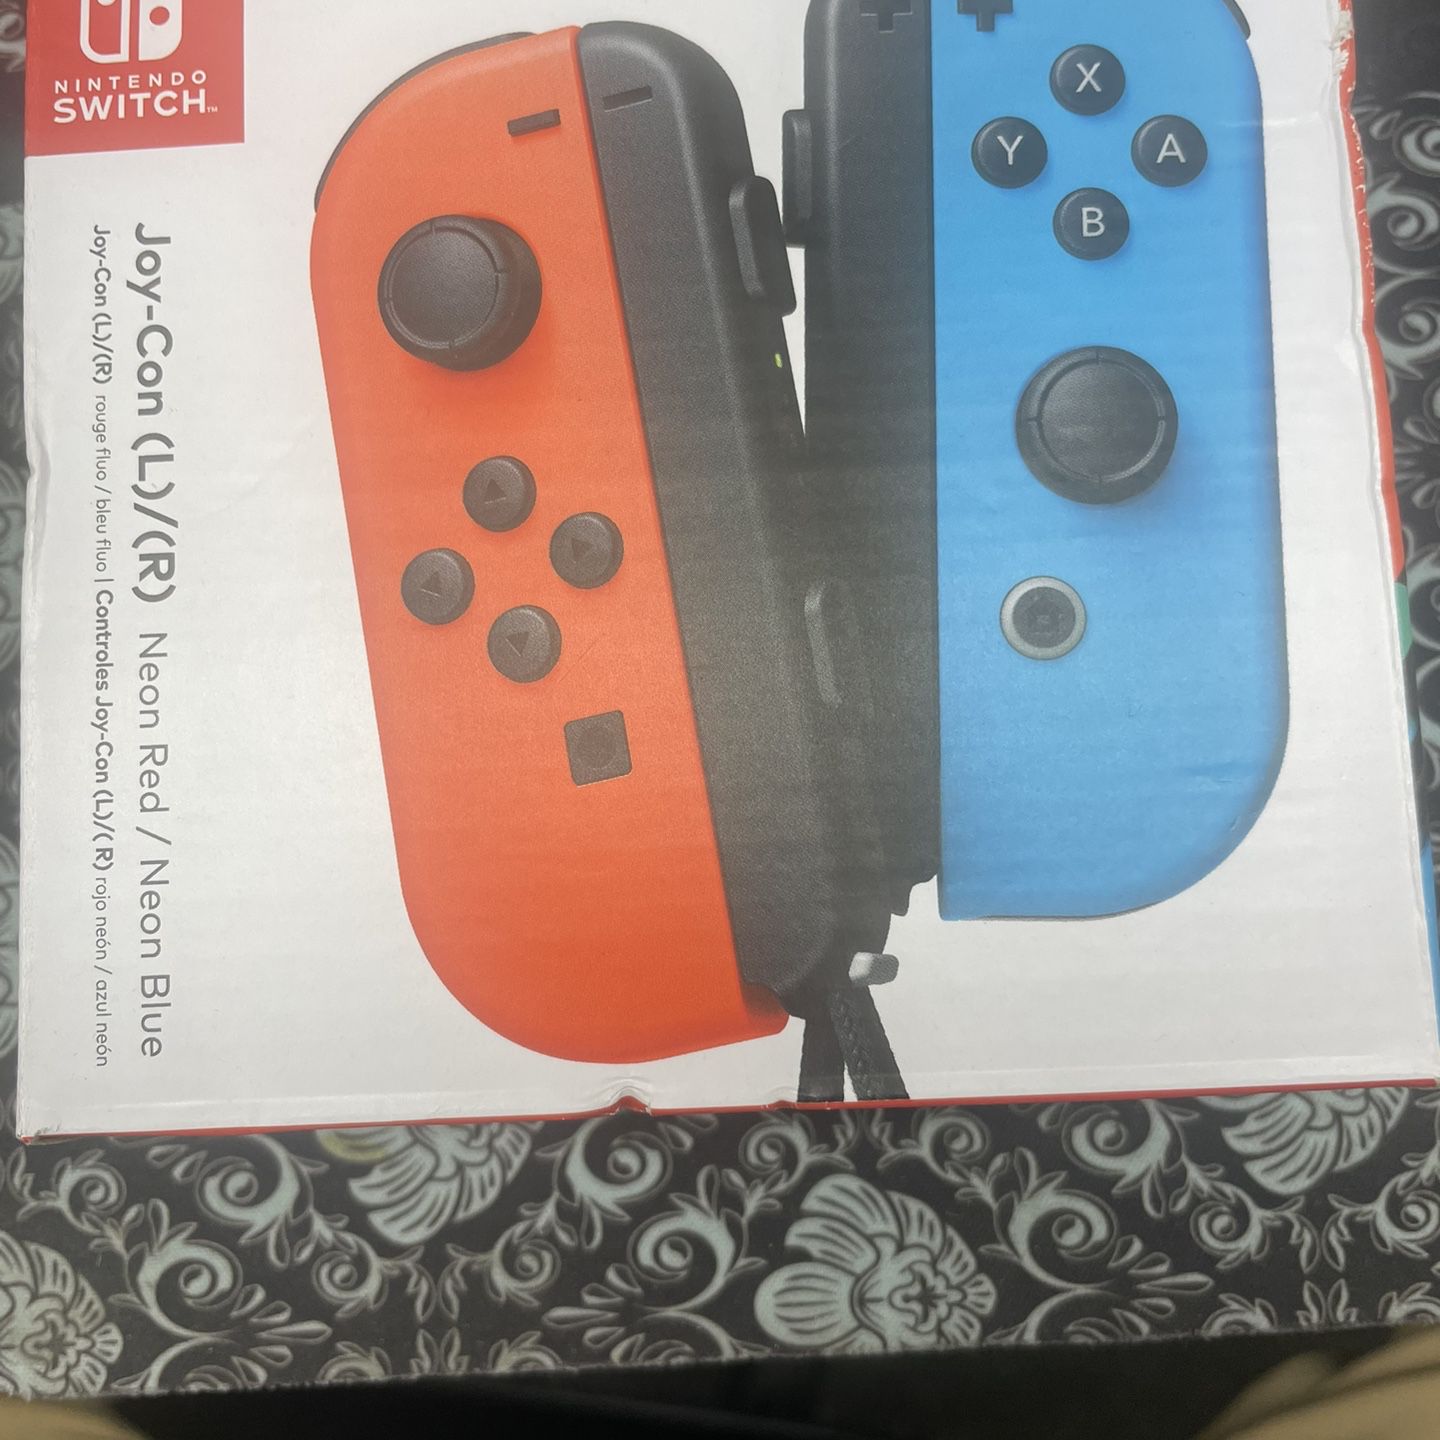 nintendo switch joy con controller new sealed lawndale ca storefront $79 Plus Tax At Best Buy